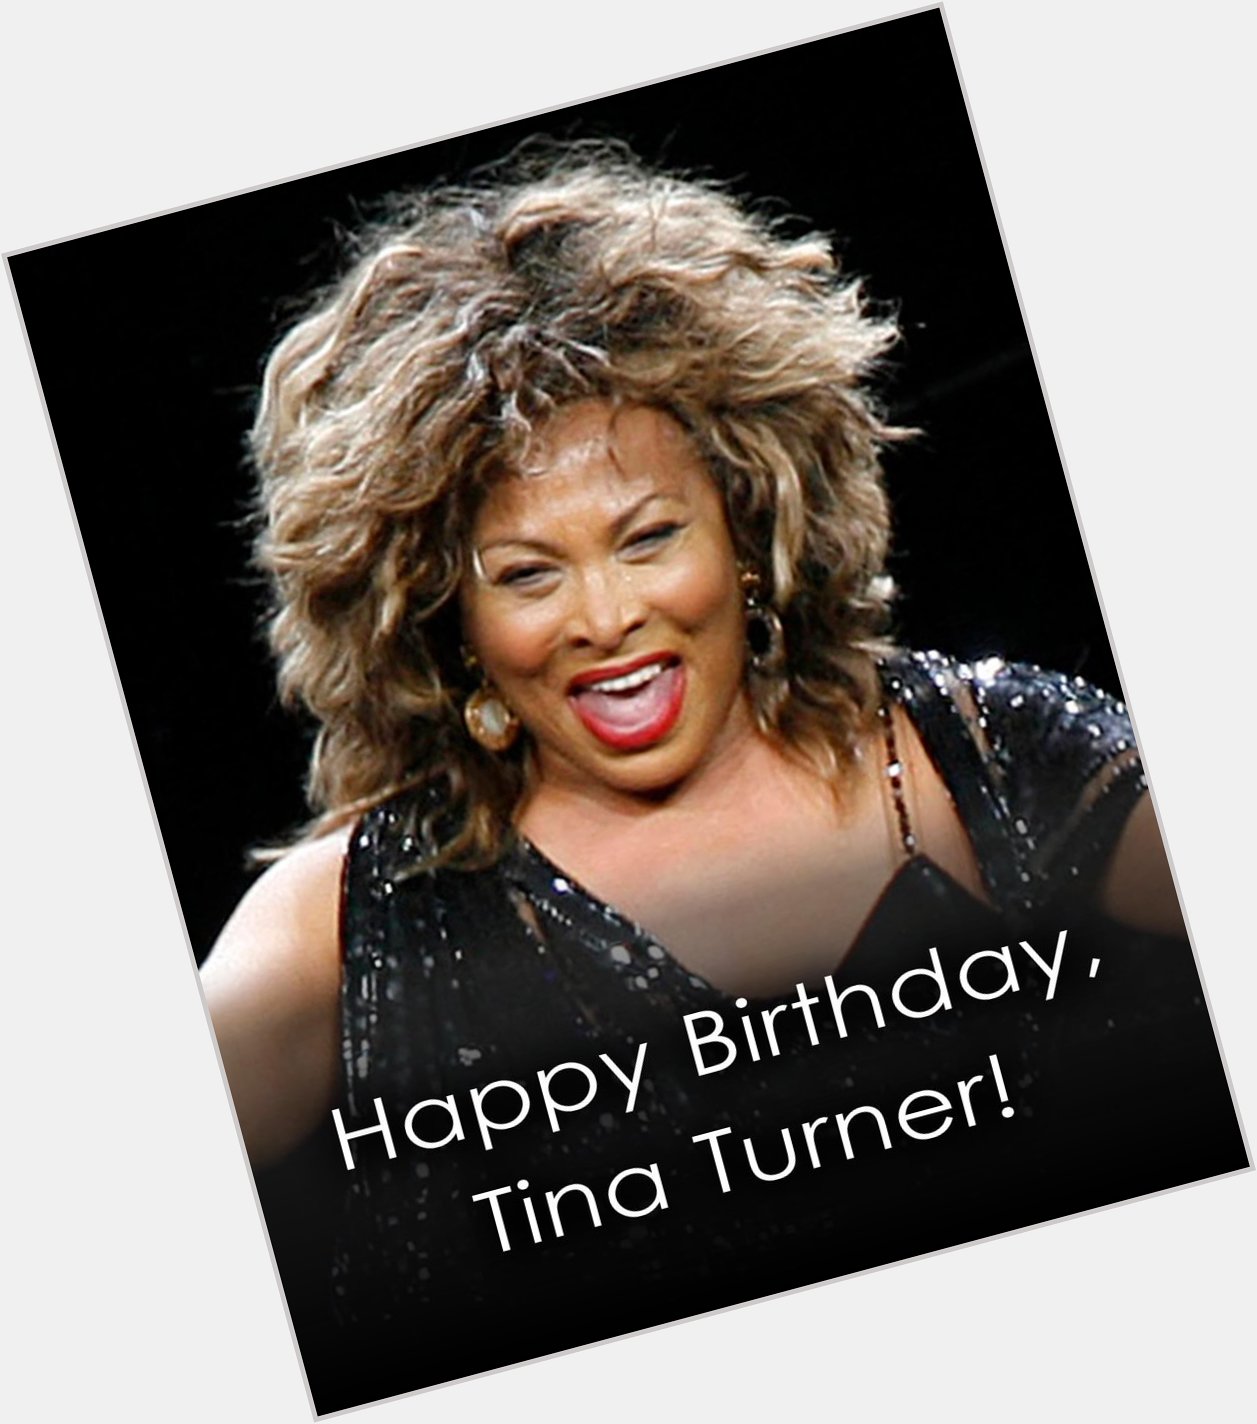 HAPPY BIRTHDAY, TINA TURNER! The legendary rock and roll singer is celebrating her 83rd birthday today! 